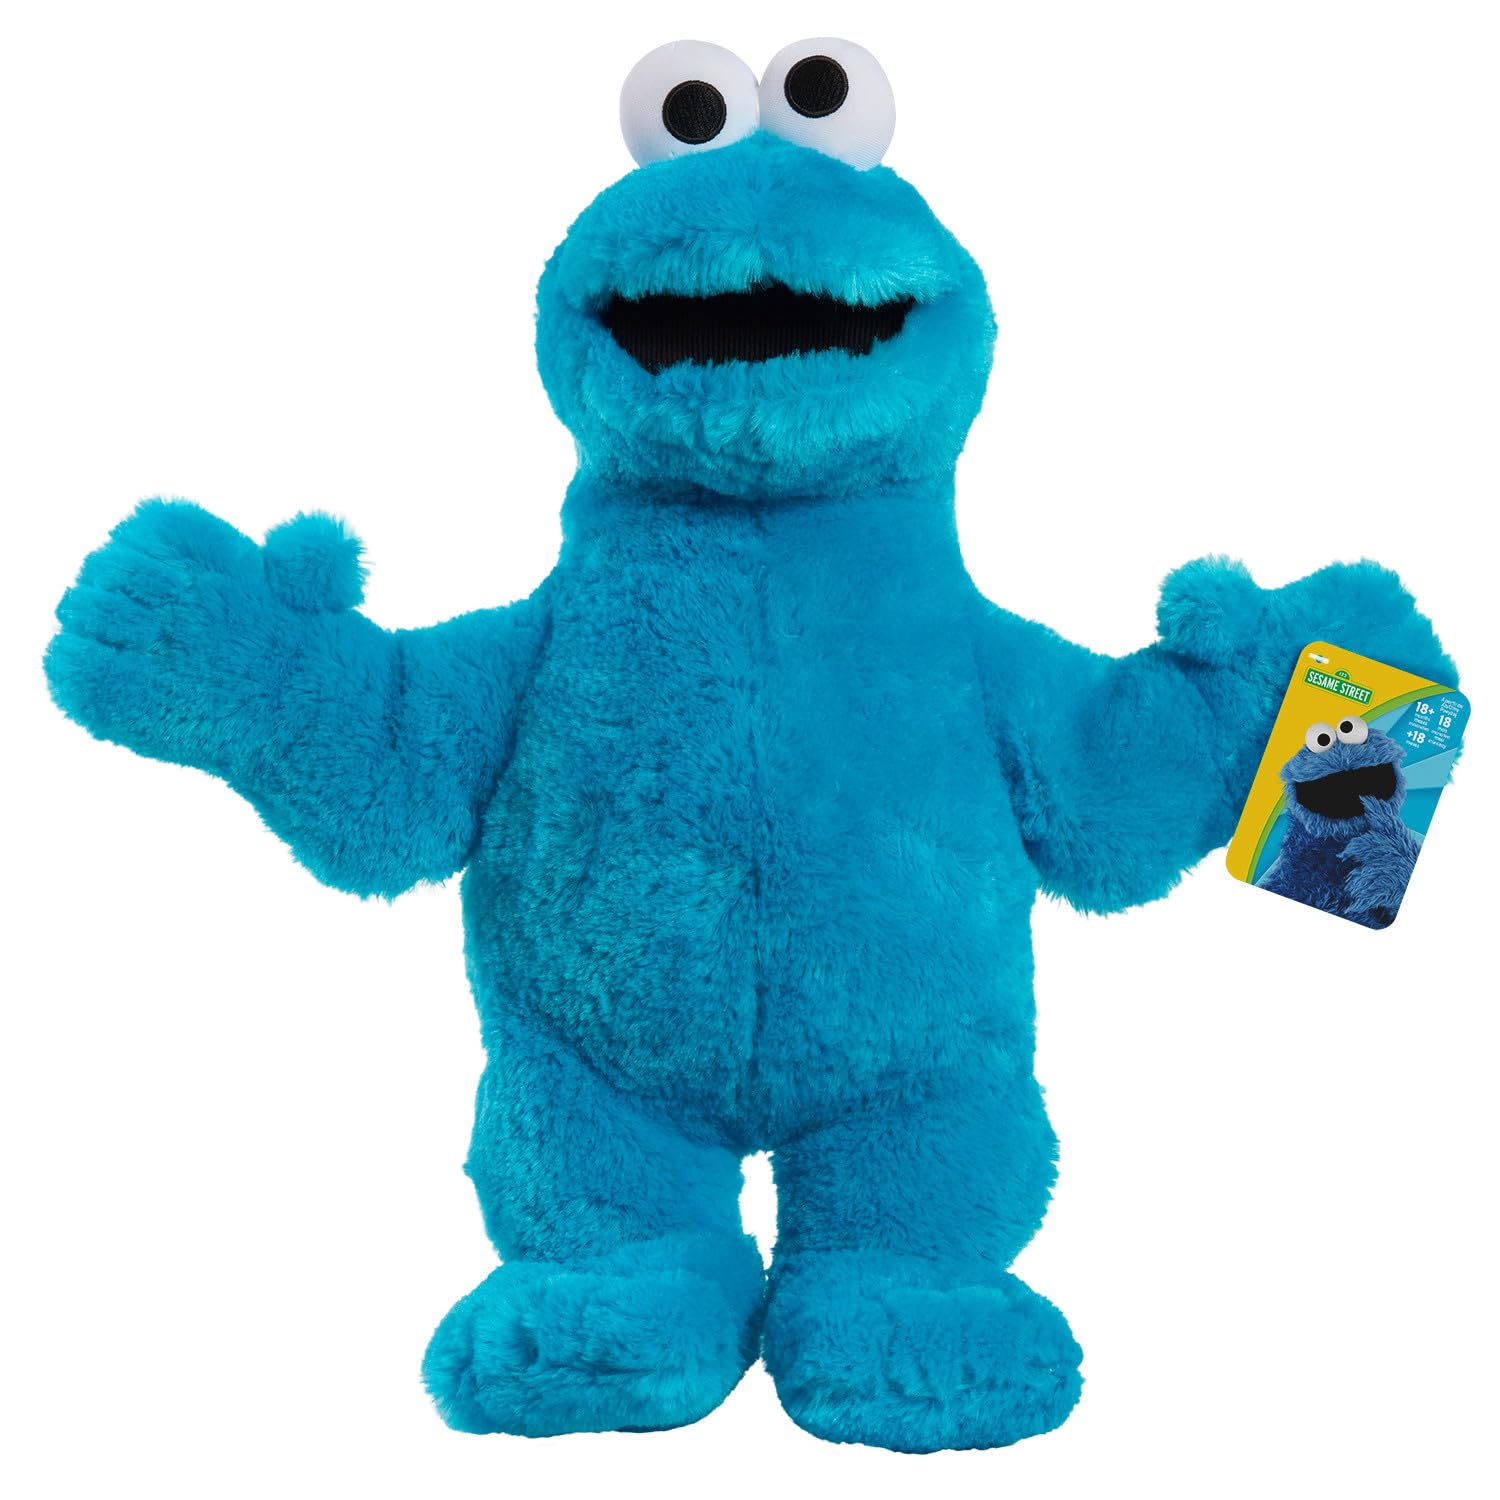 SESAME STREET Big Hugs 18-inch Large Plush Cookie Monster, Pretend Play, Kids Toys for Ages 3 Up by Just Play